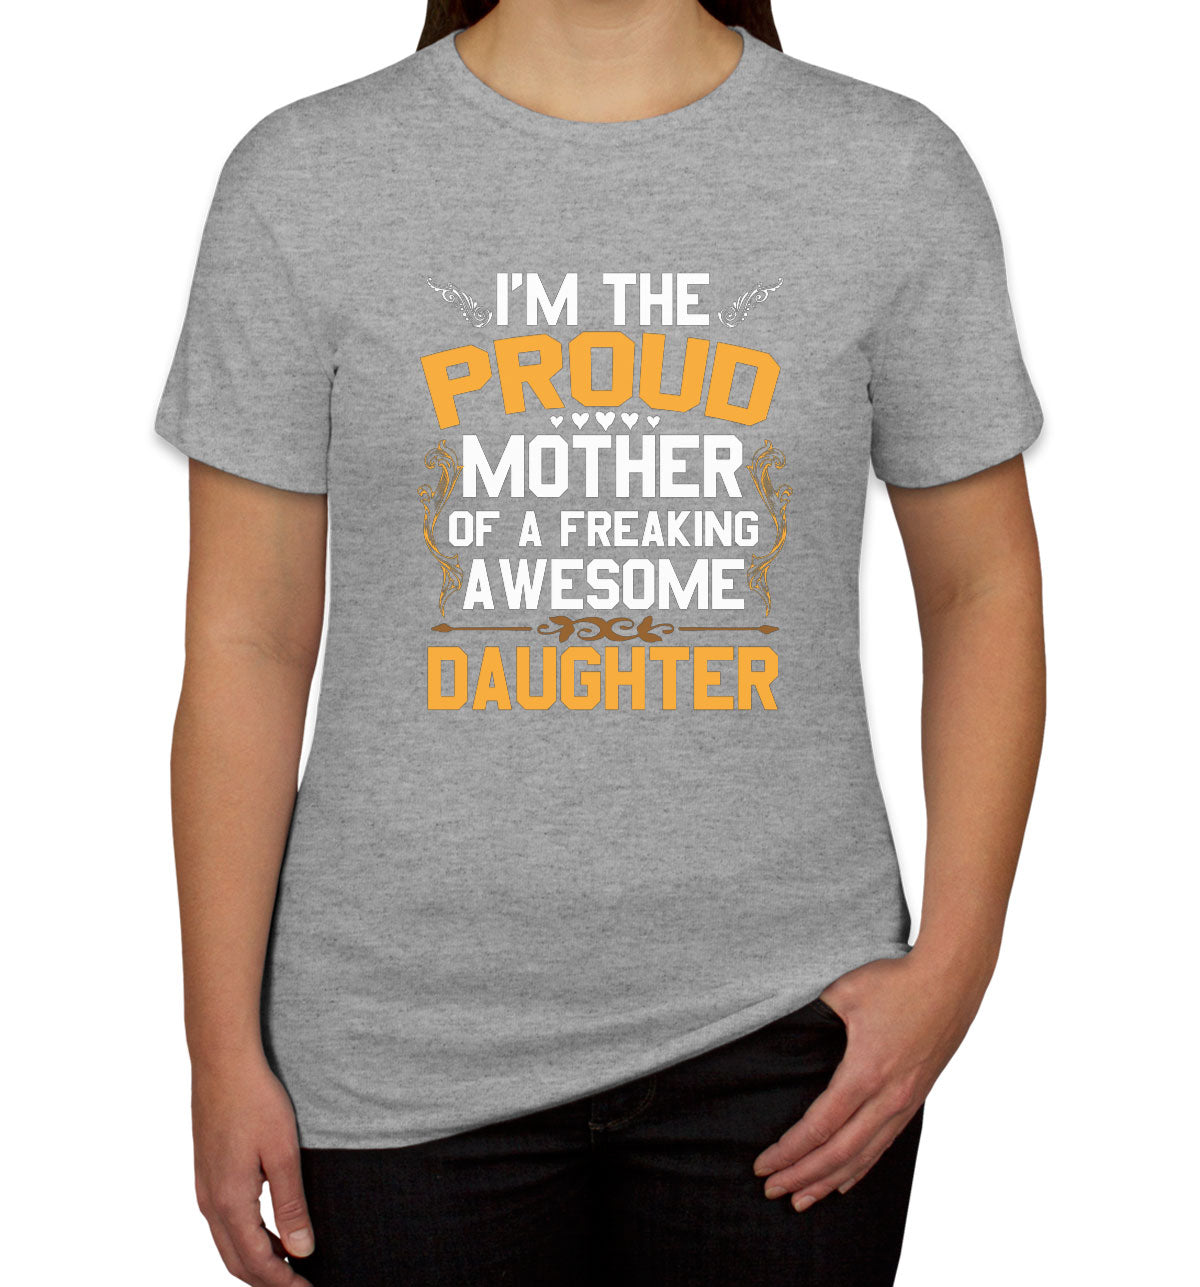 I'm The Proud Mother Of A Freaking Awesome Daughter Women's T-shirt